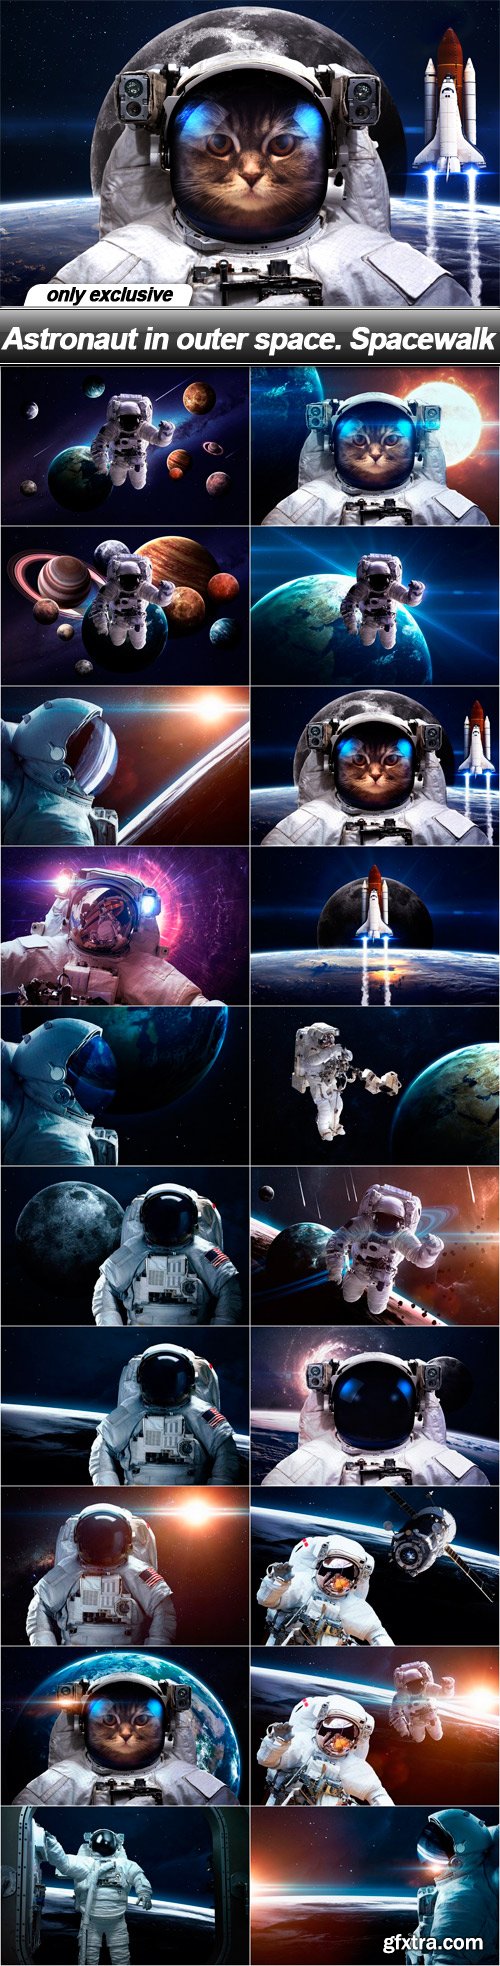 Astronaut in outer space. Spacewalk - 20 UHQ JPEG